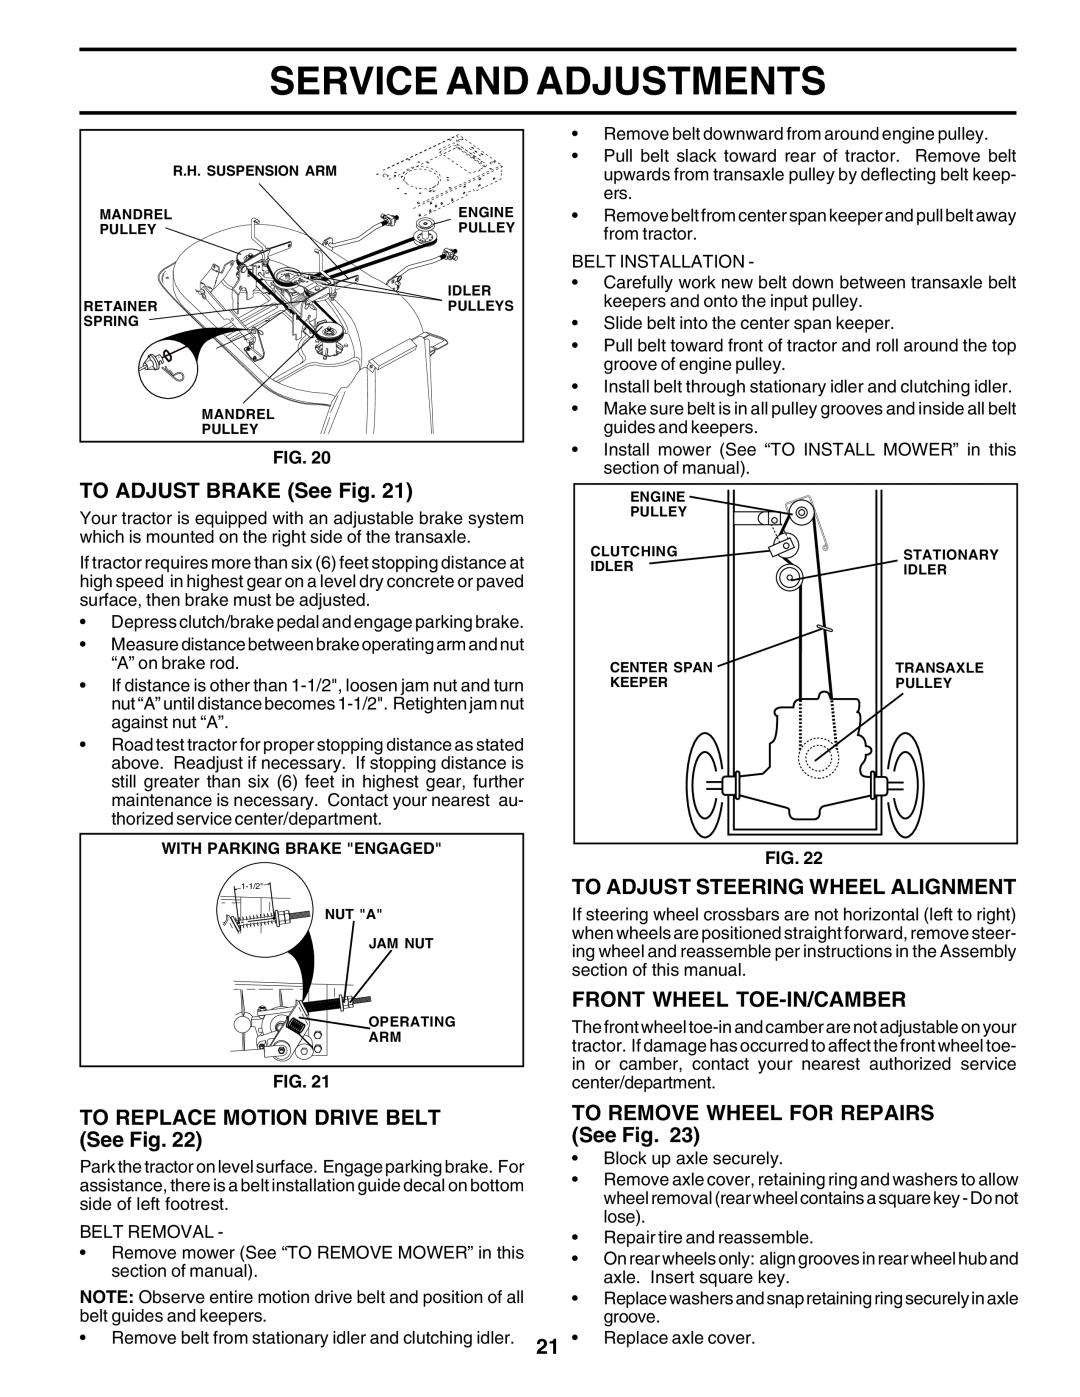 Weed Eater WE1538B manual TO ADJUST BRAKE See Fig, To Adjust Steering Wheel Alignment, Front Wheel Toe-In/Camber 